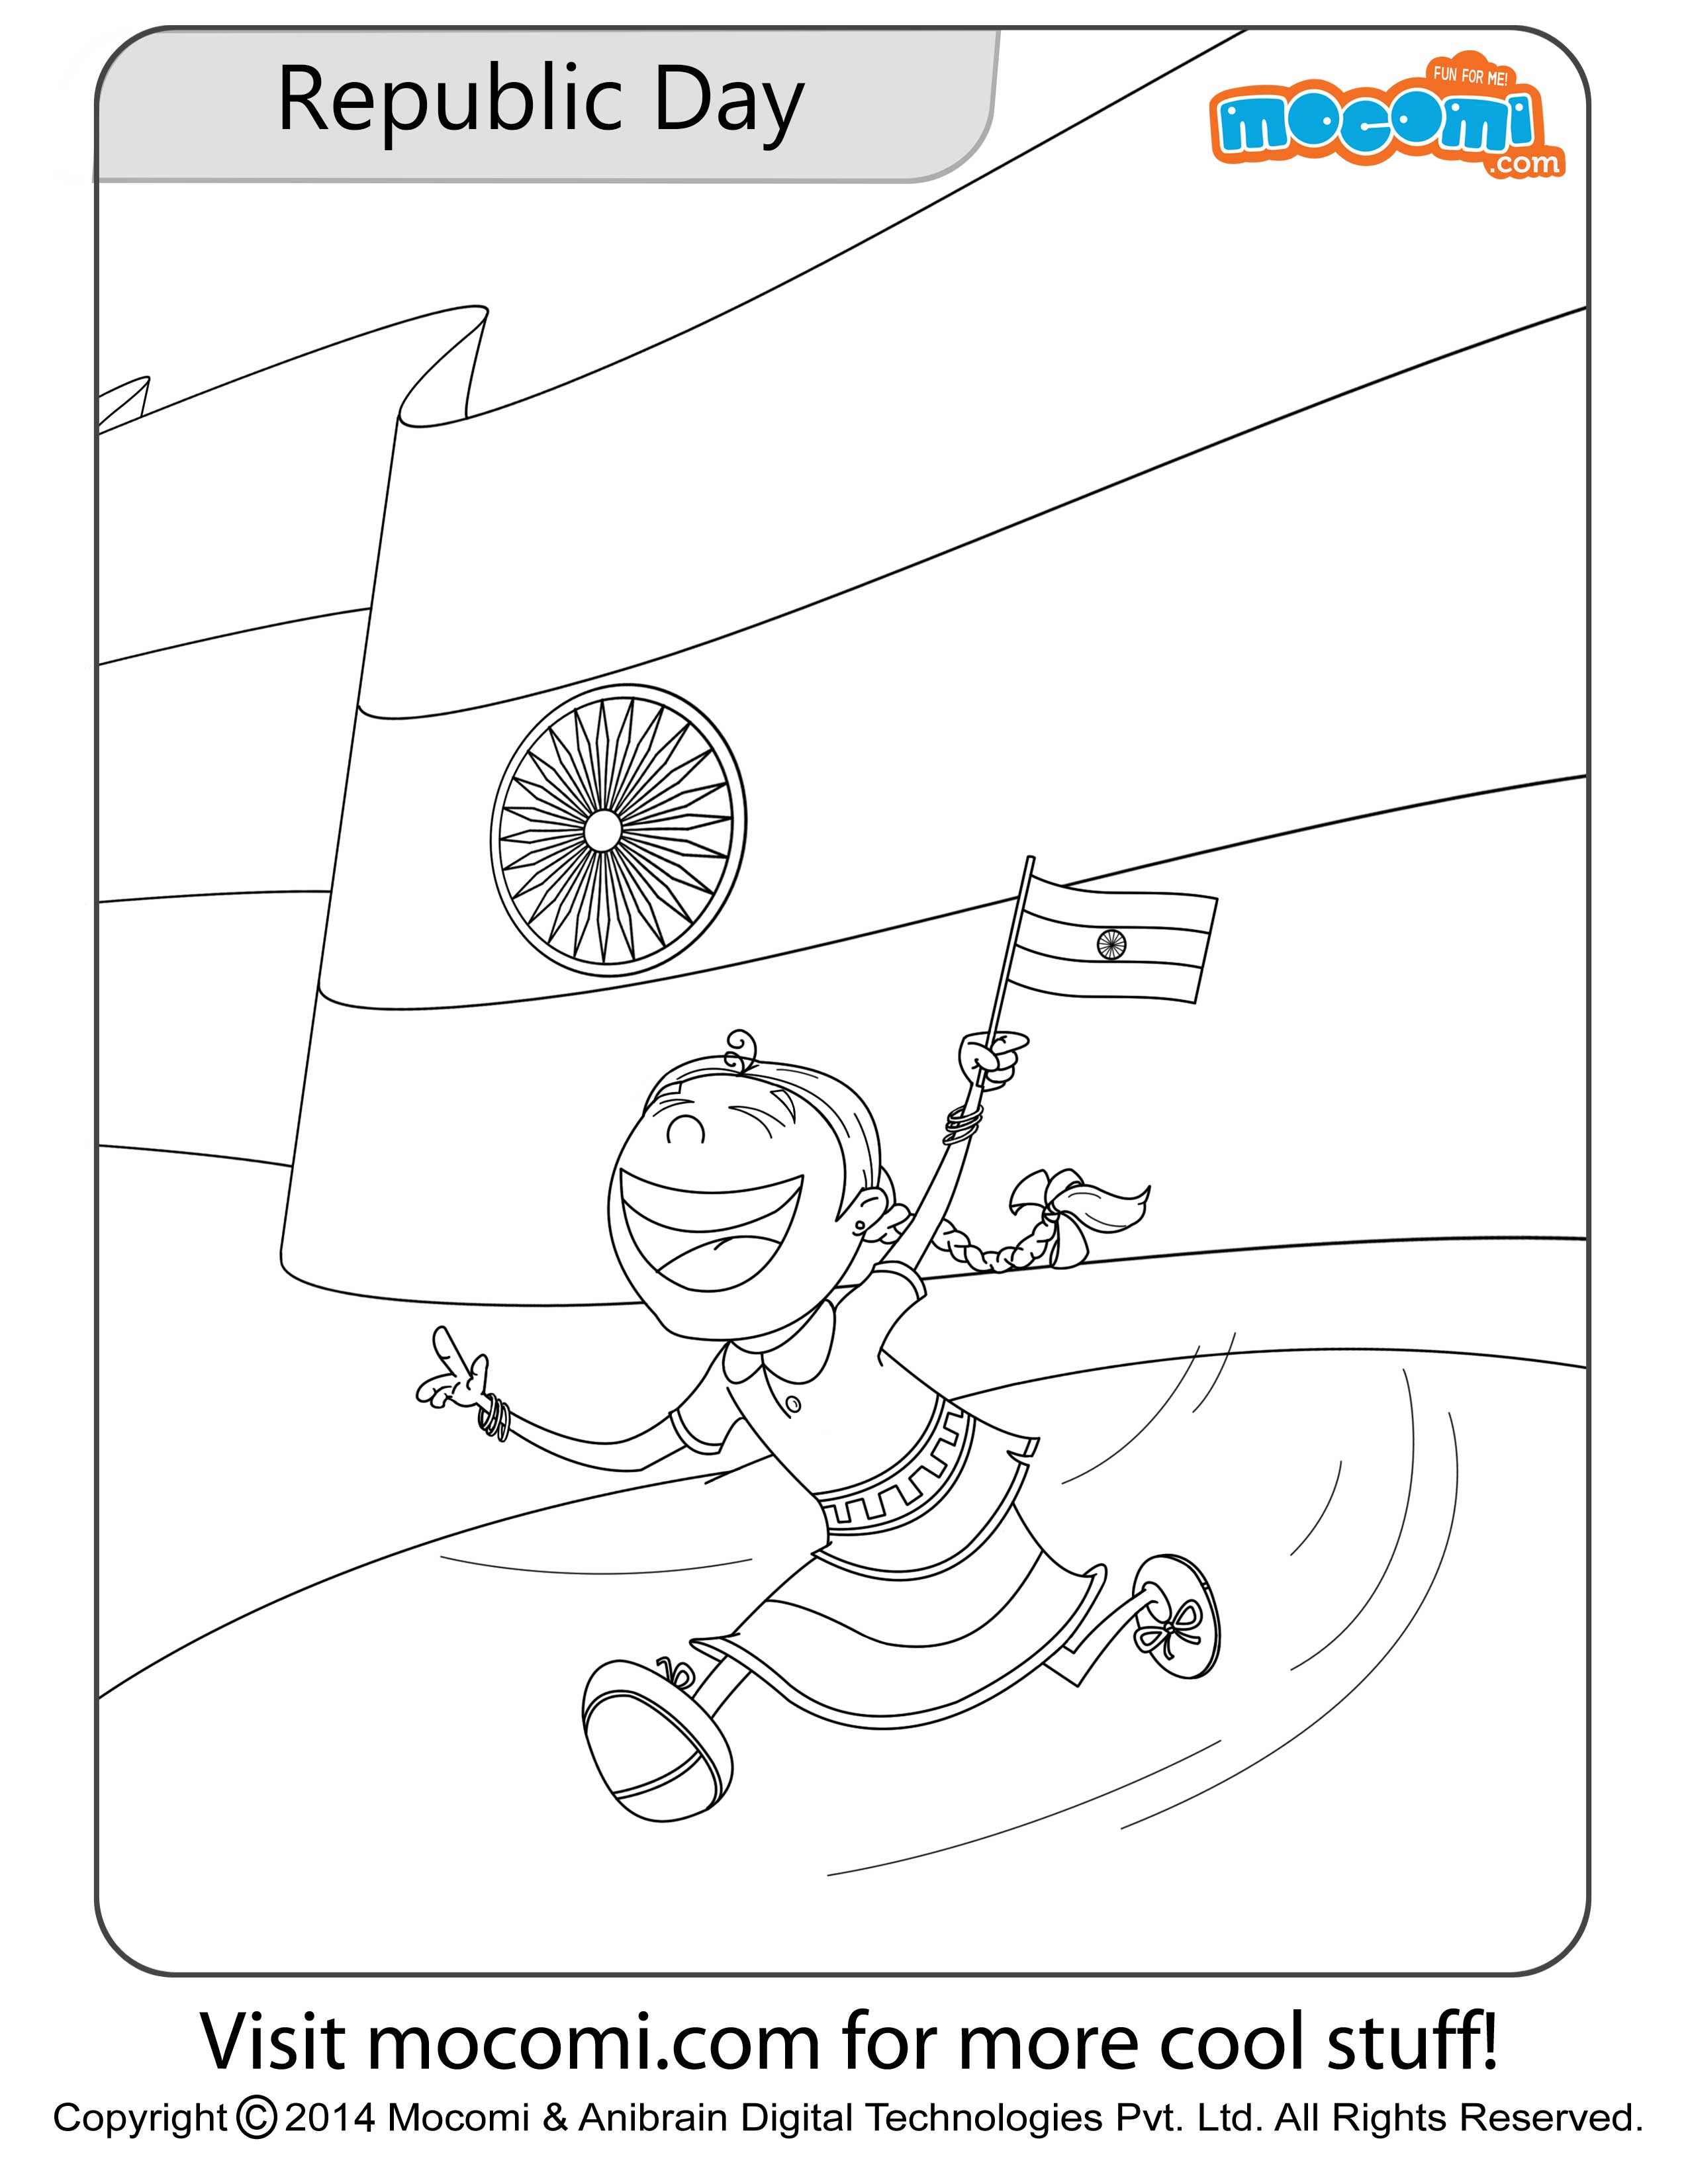 Republic Day – Colouring Page